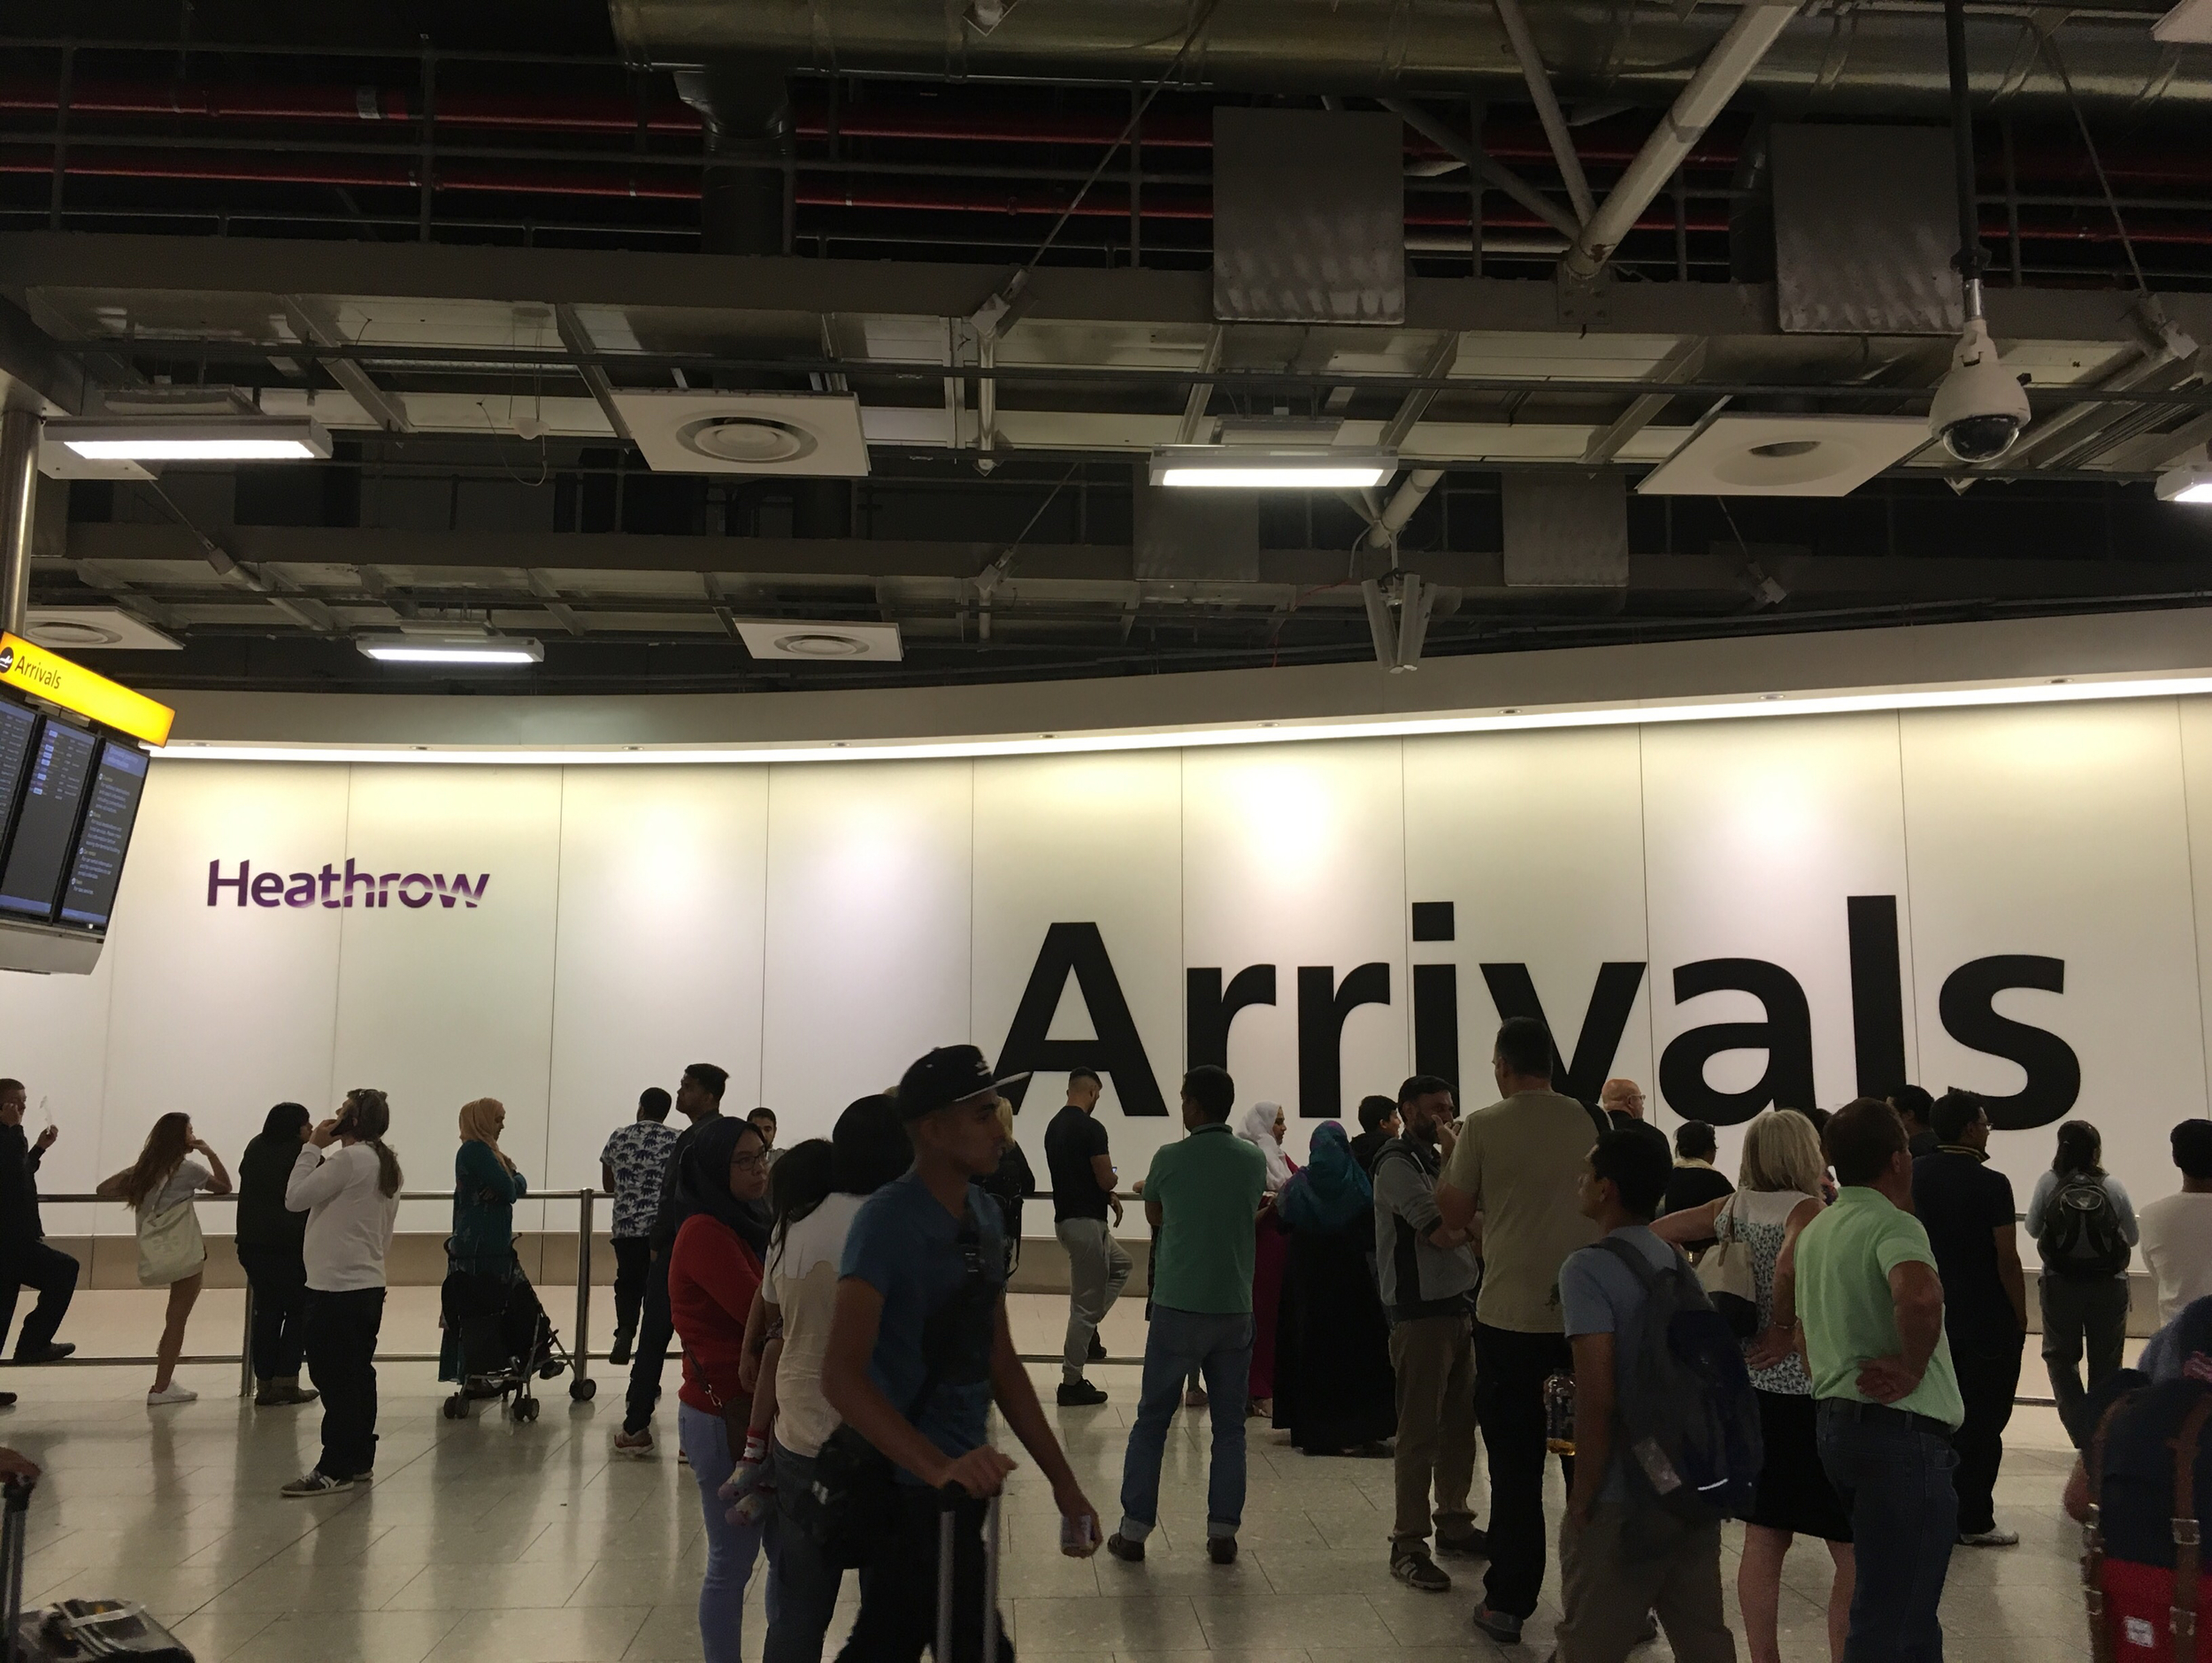 Arrival Section of Heathrow Airport